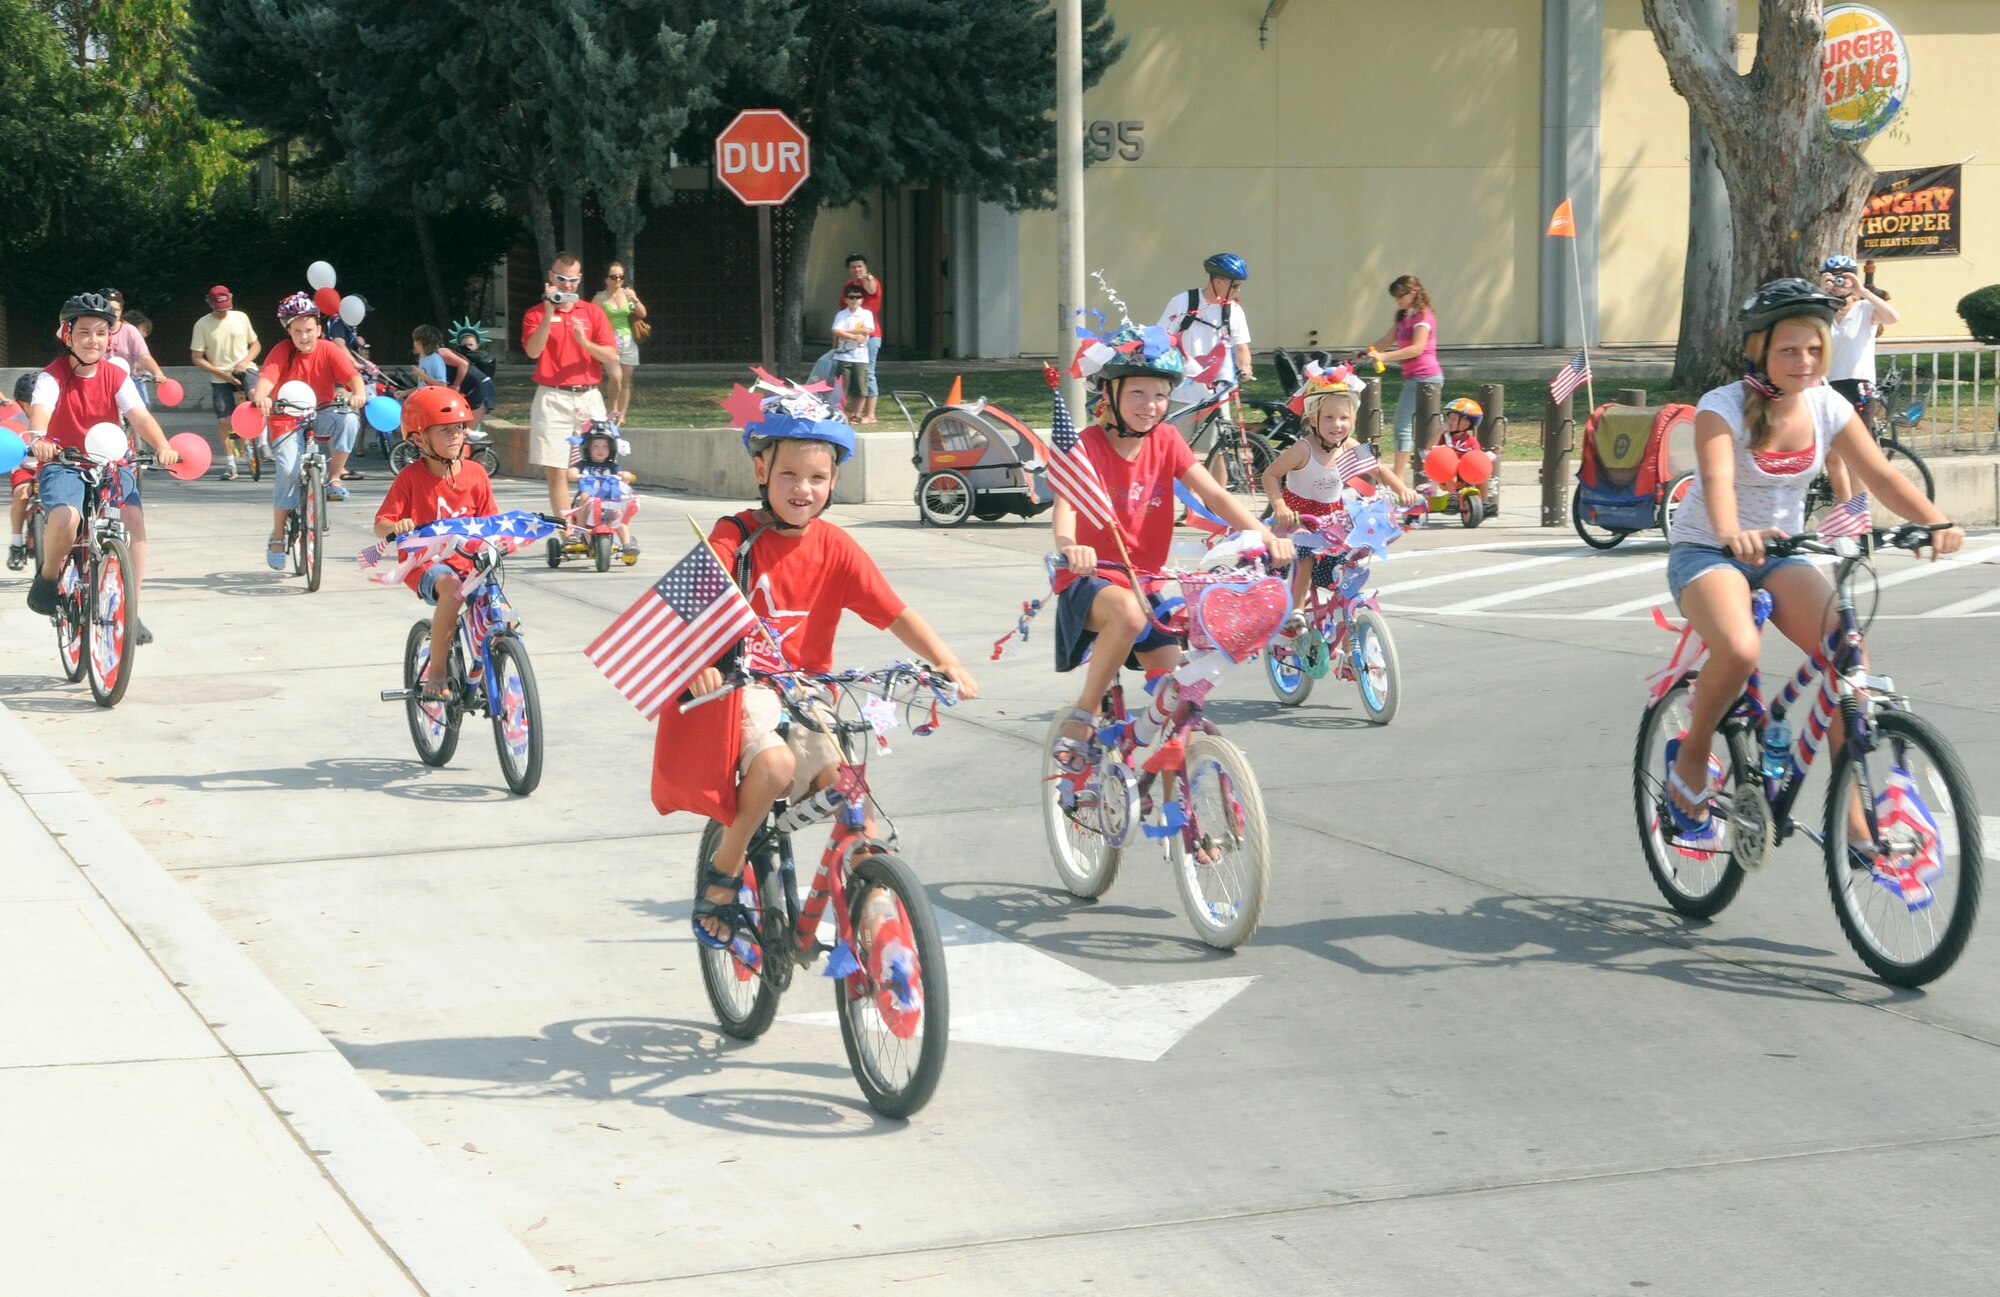 Incirlik youth showcase their patriotically decorated bicycles during the Freedom Fest Fourth of July Bicycle Parade Saturday, July 4, 2009 at Incirlik Air Base, Turkey. The participants rode their bicycles from the Base Exchange parking lot to Arkadas Park. Prizes were awarded to the individuals with the best decorations for their bike category. Freedom Fest was the base’s official Fourth of July celebration and included events such as live bands, concession stands, arts and crafts, a petting zoo and a fireworks show. (U.S. Air Force photo/Senior Airman Alex Martinez)